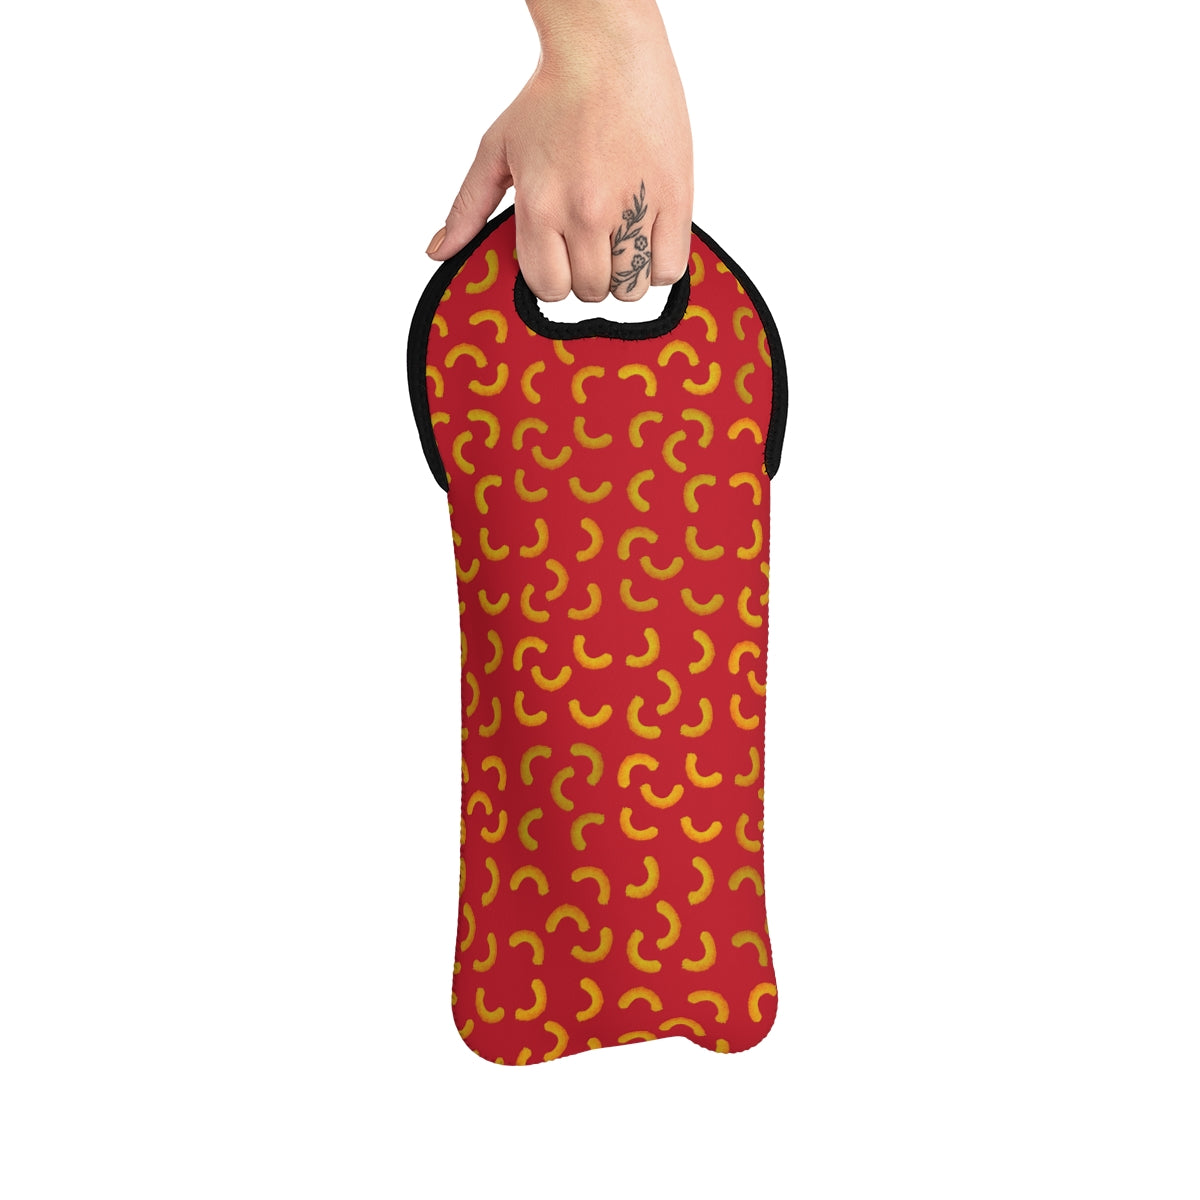 Chezy doodles - Wine Tote Bag - Red